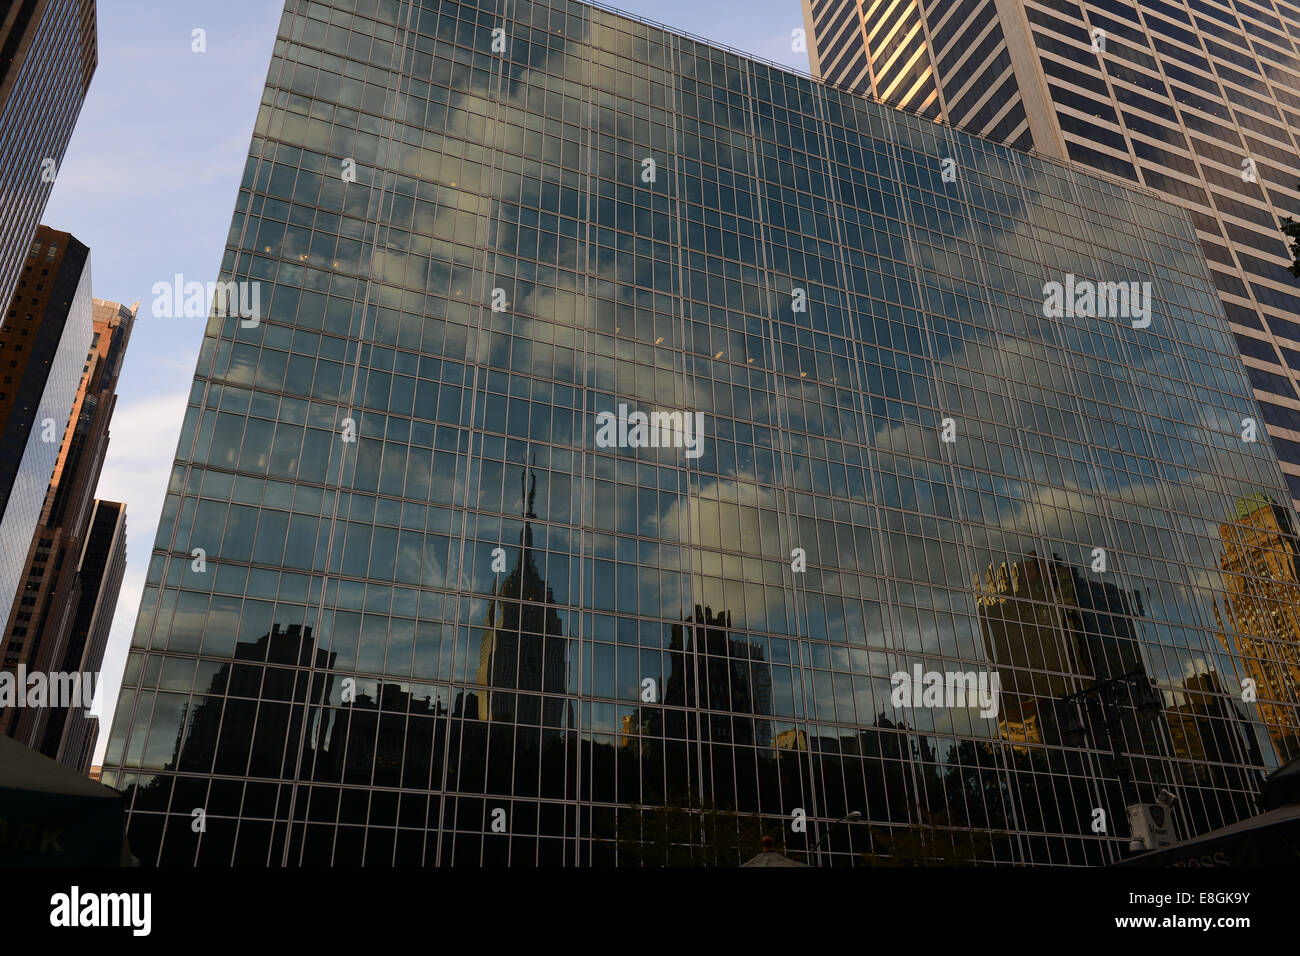 USA, New York State, New York City, Reflection of Empire State Building and skyline in building facade Stock Photo